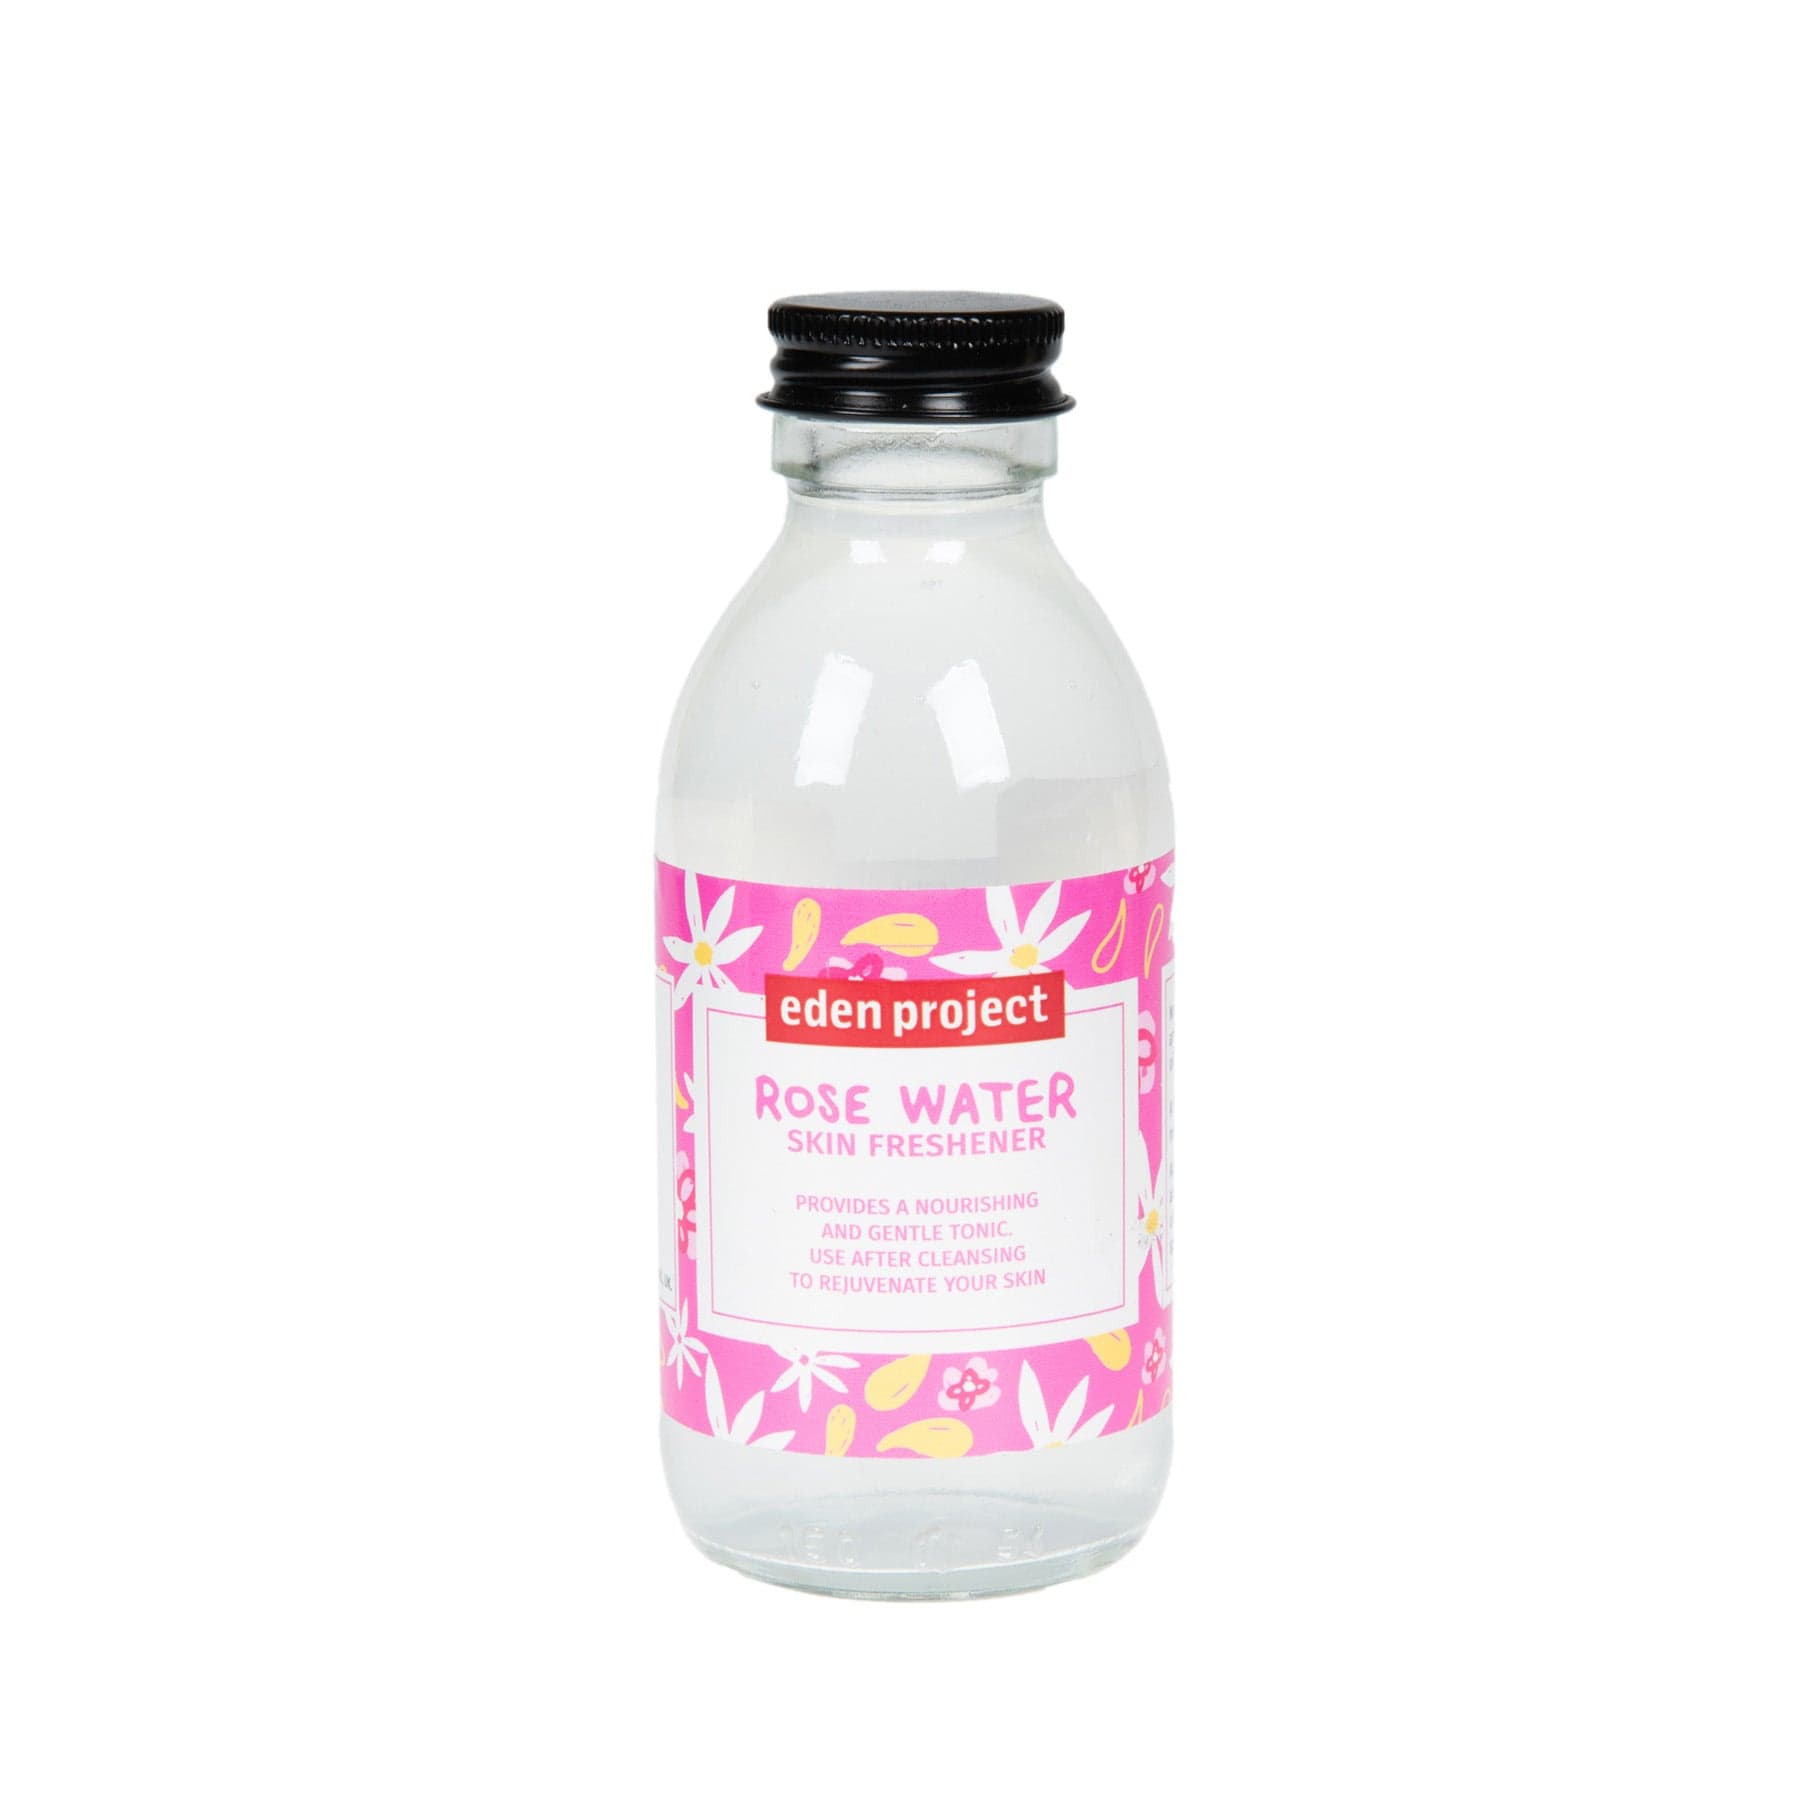 Transparent bottle of Eden Project Rose Water Skin Freshener with pink floral label and black cap on white background